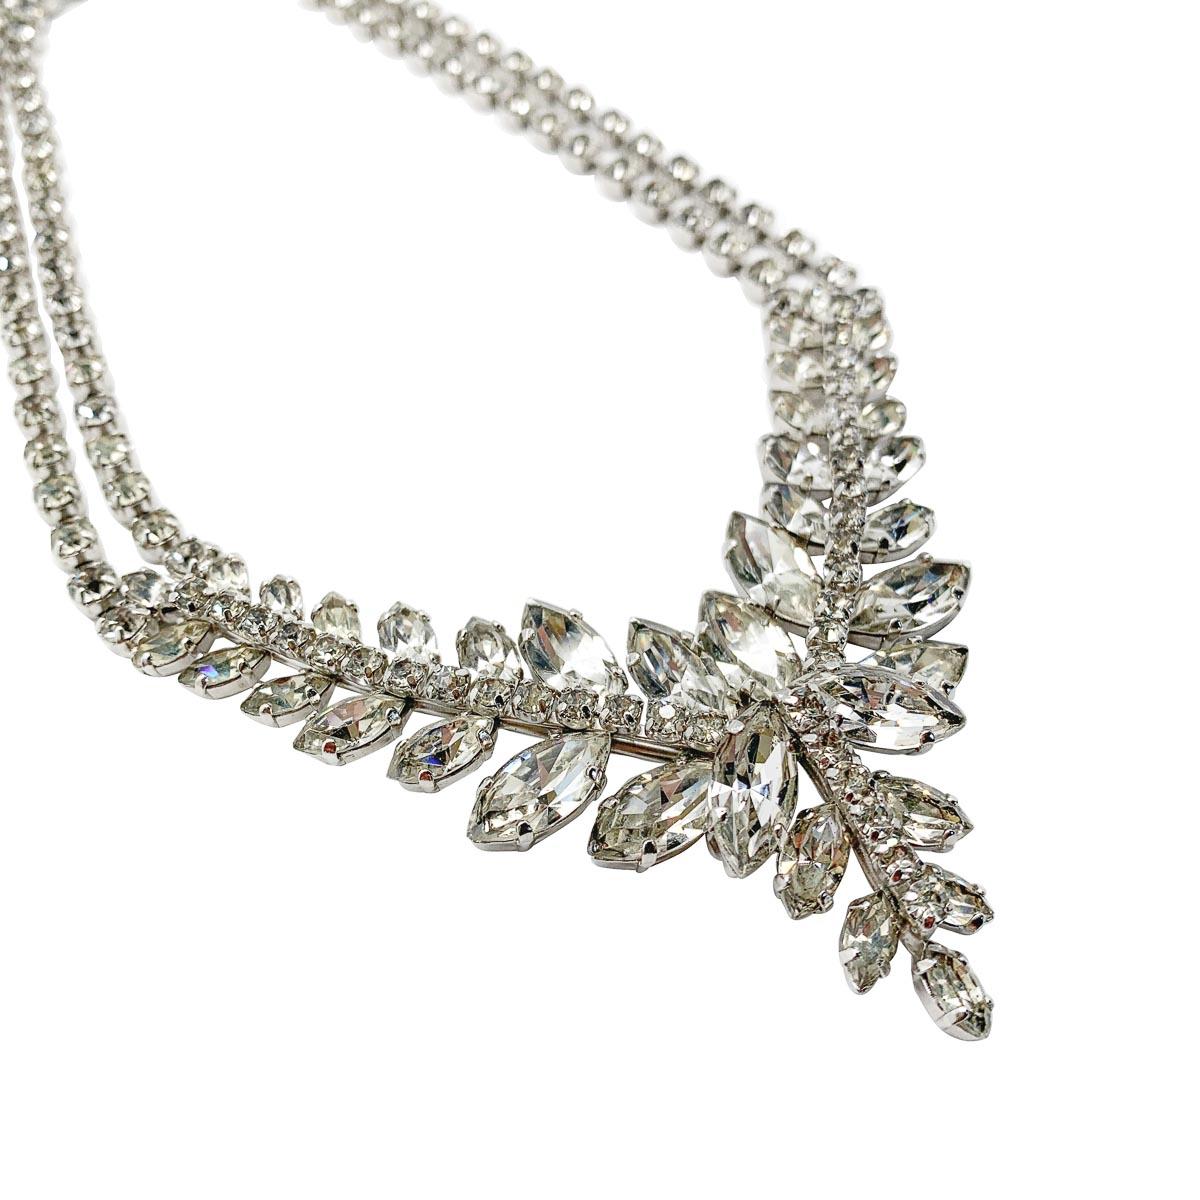 A vintage marquise rhinestone necklace. An enchanting rhinestone collar from the 1950s. Featuring a beautiful array of marquise crystals and chaton crystals in a full collar design with a very flattering V shaped front.
Featuring a wreath style of